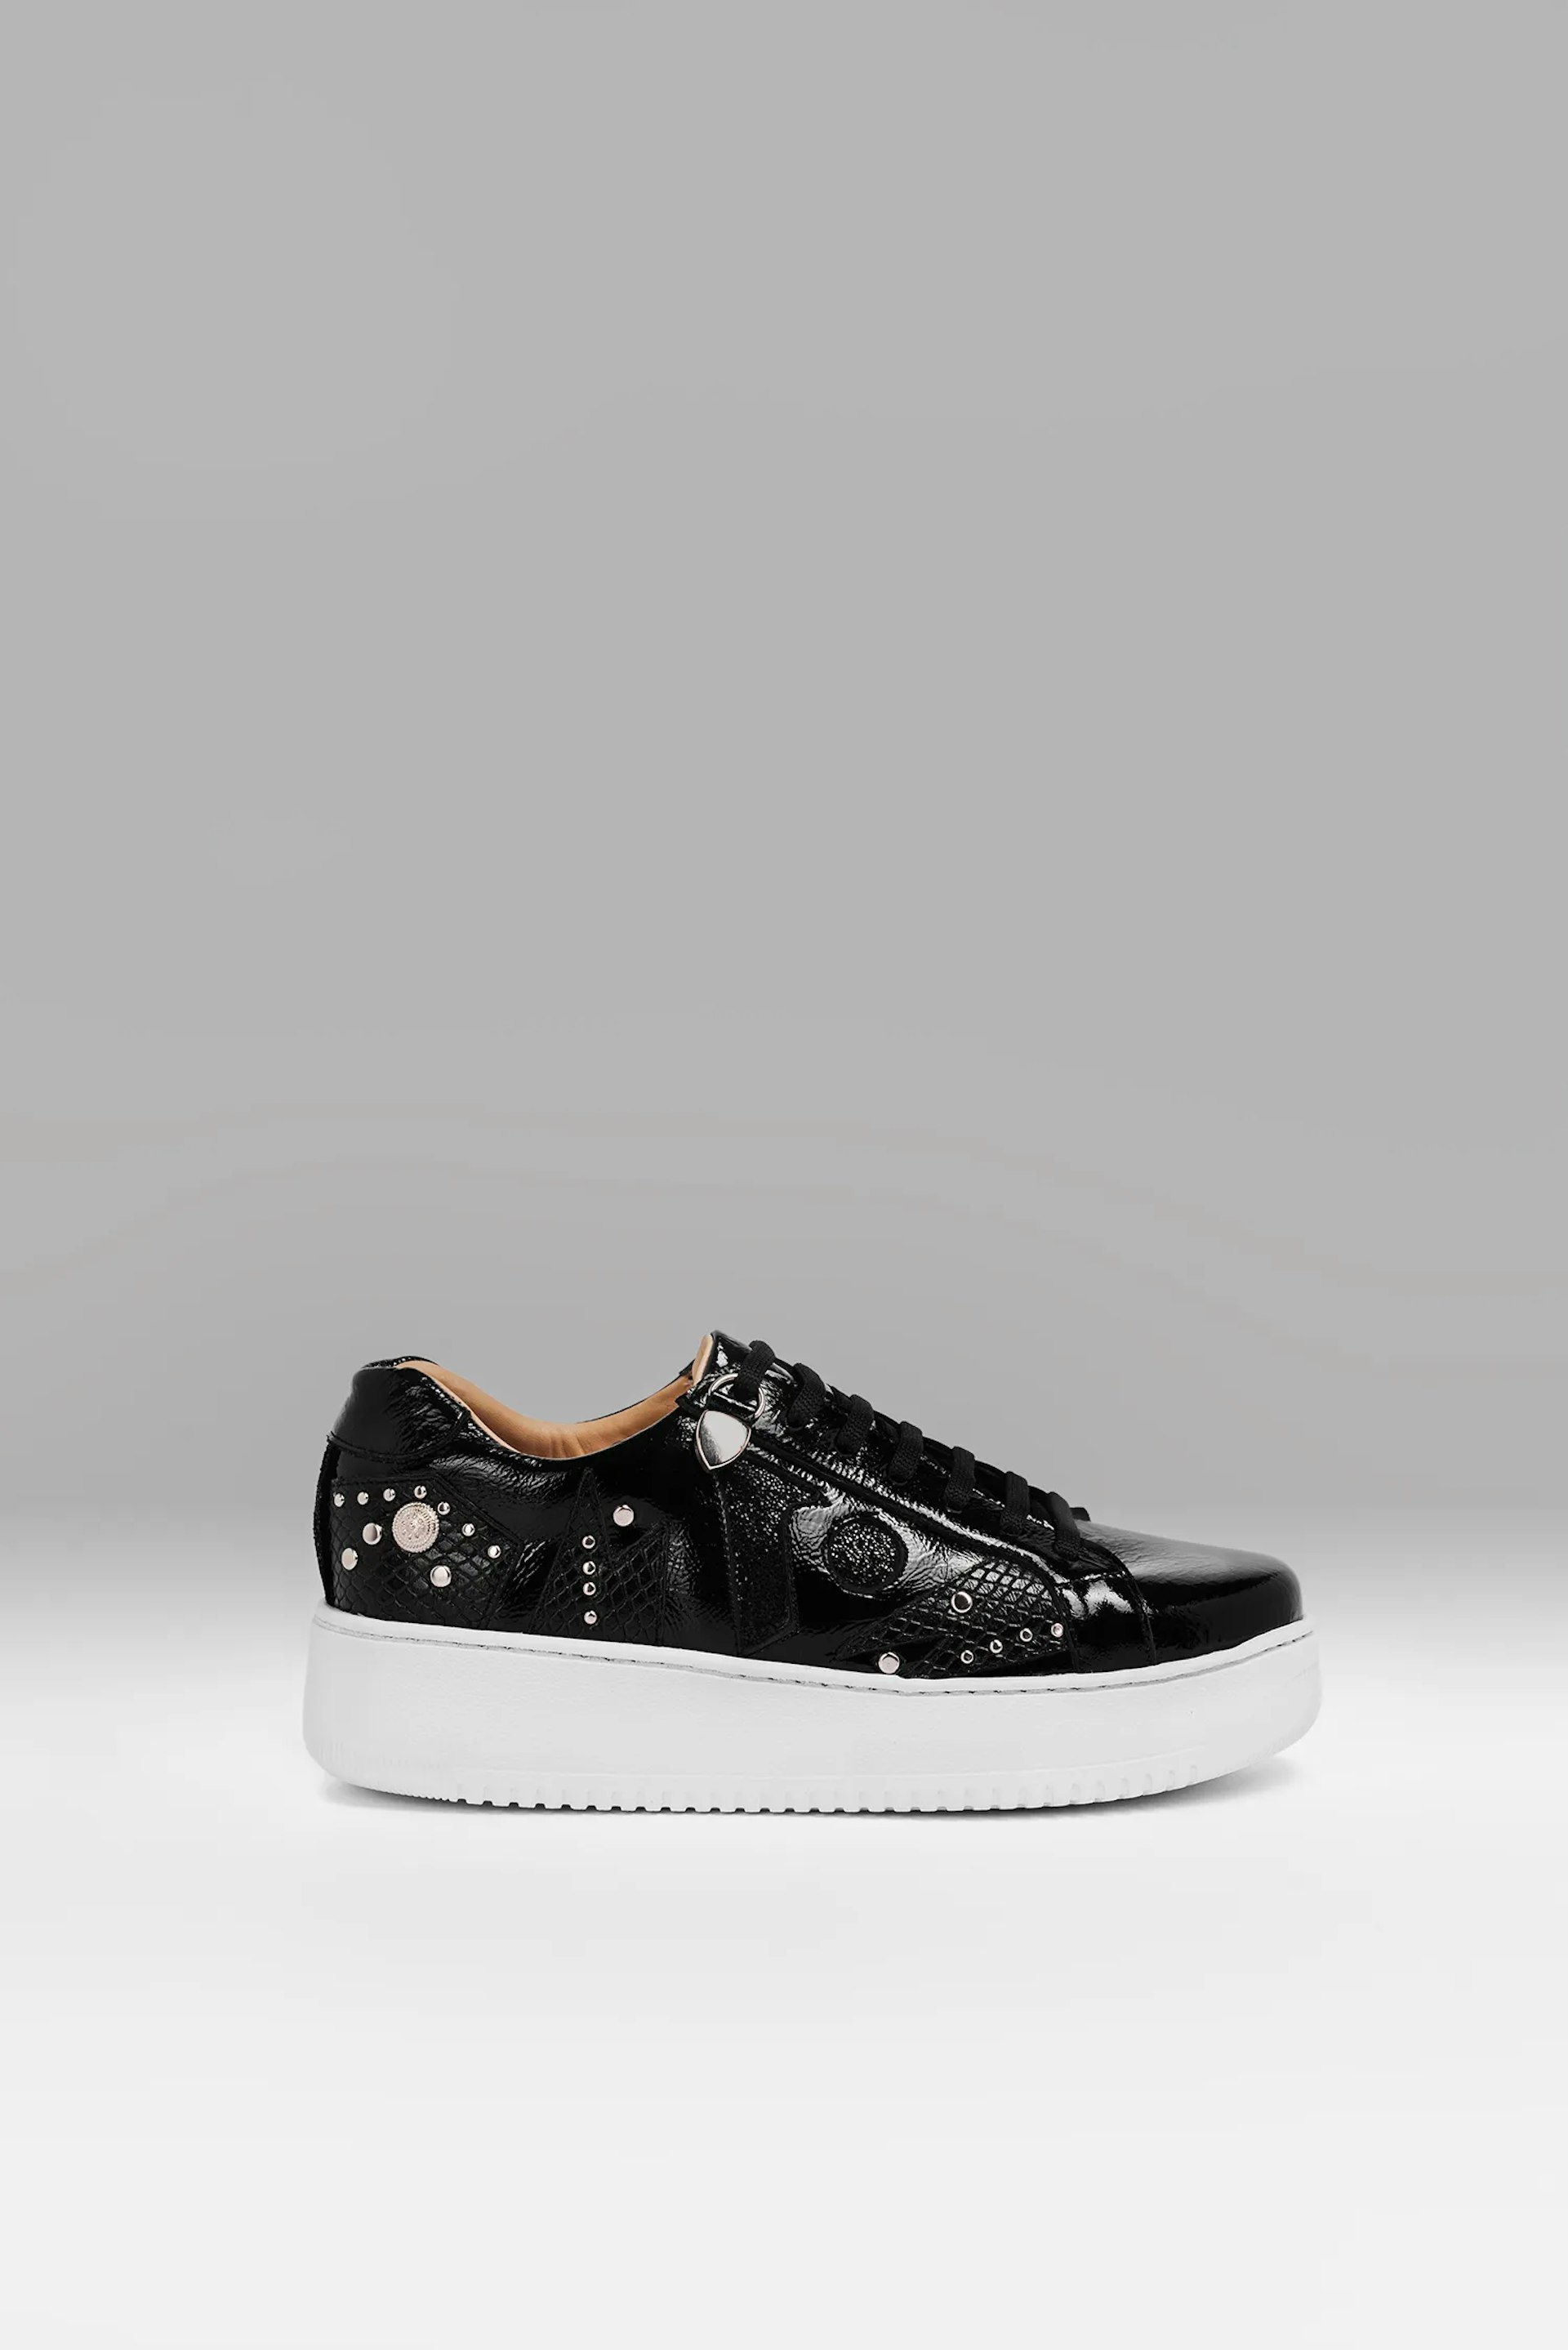 Sneakers Vitti Girona. Sneaker made 100% of leather. Upper in shiny black leather with cutouts in matching textured leatherSneaker made 100% of leather. Upper in shiny black leather with cutouts in matching textured leather...